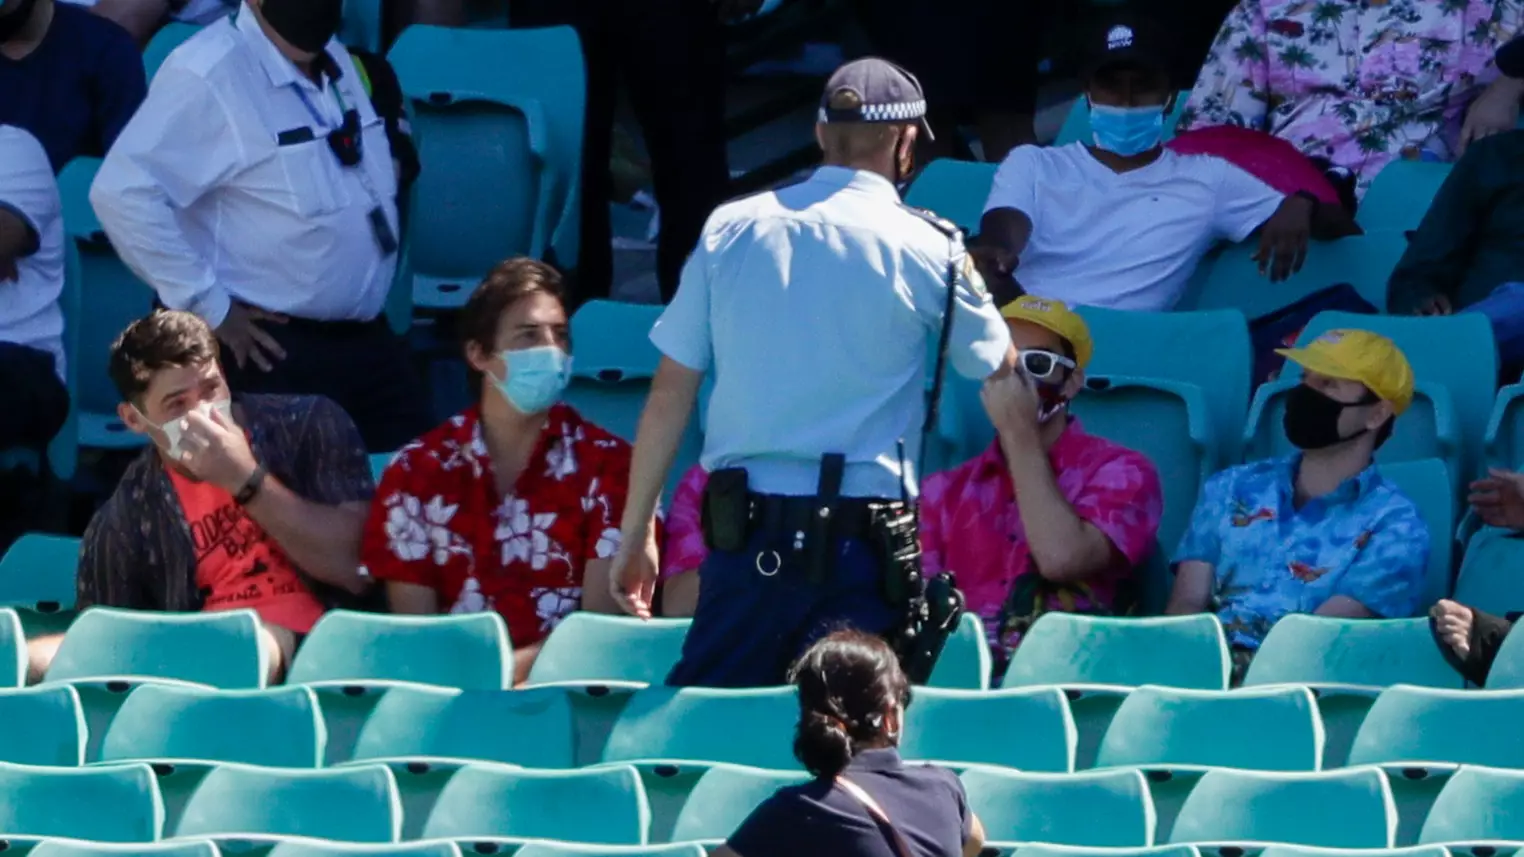 Six Aussies Ejected From SCG For Allegedly Hurling Racist Abuse At Indian Players 